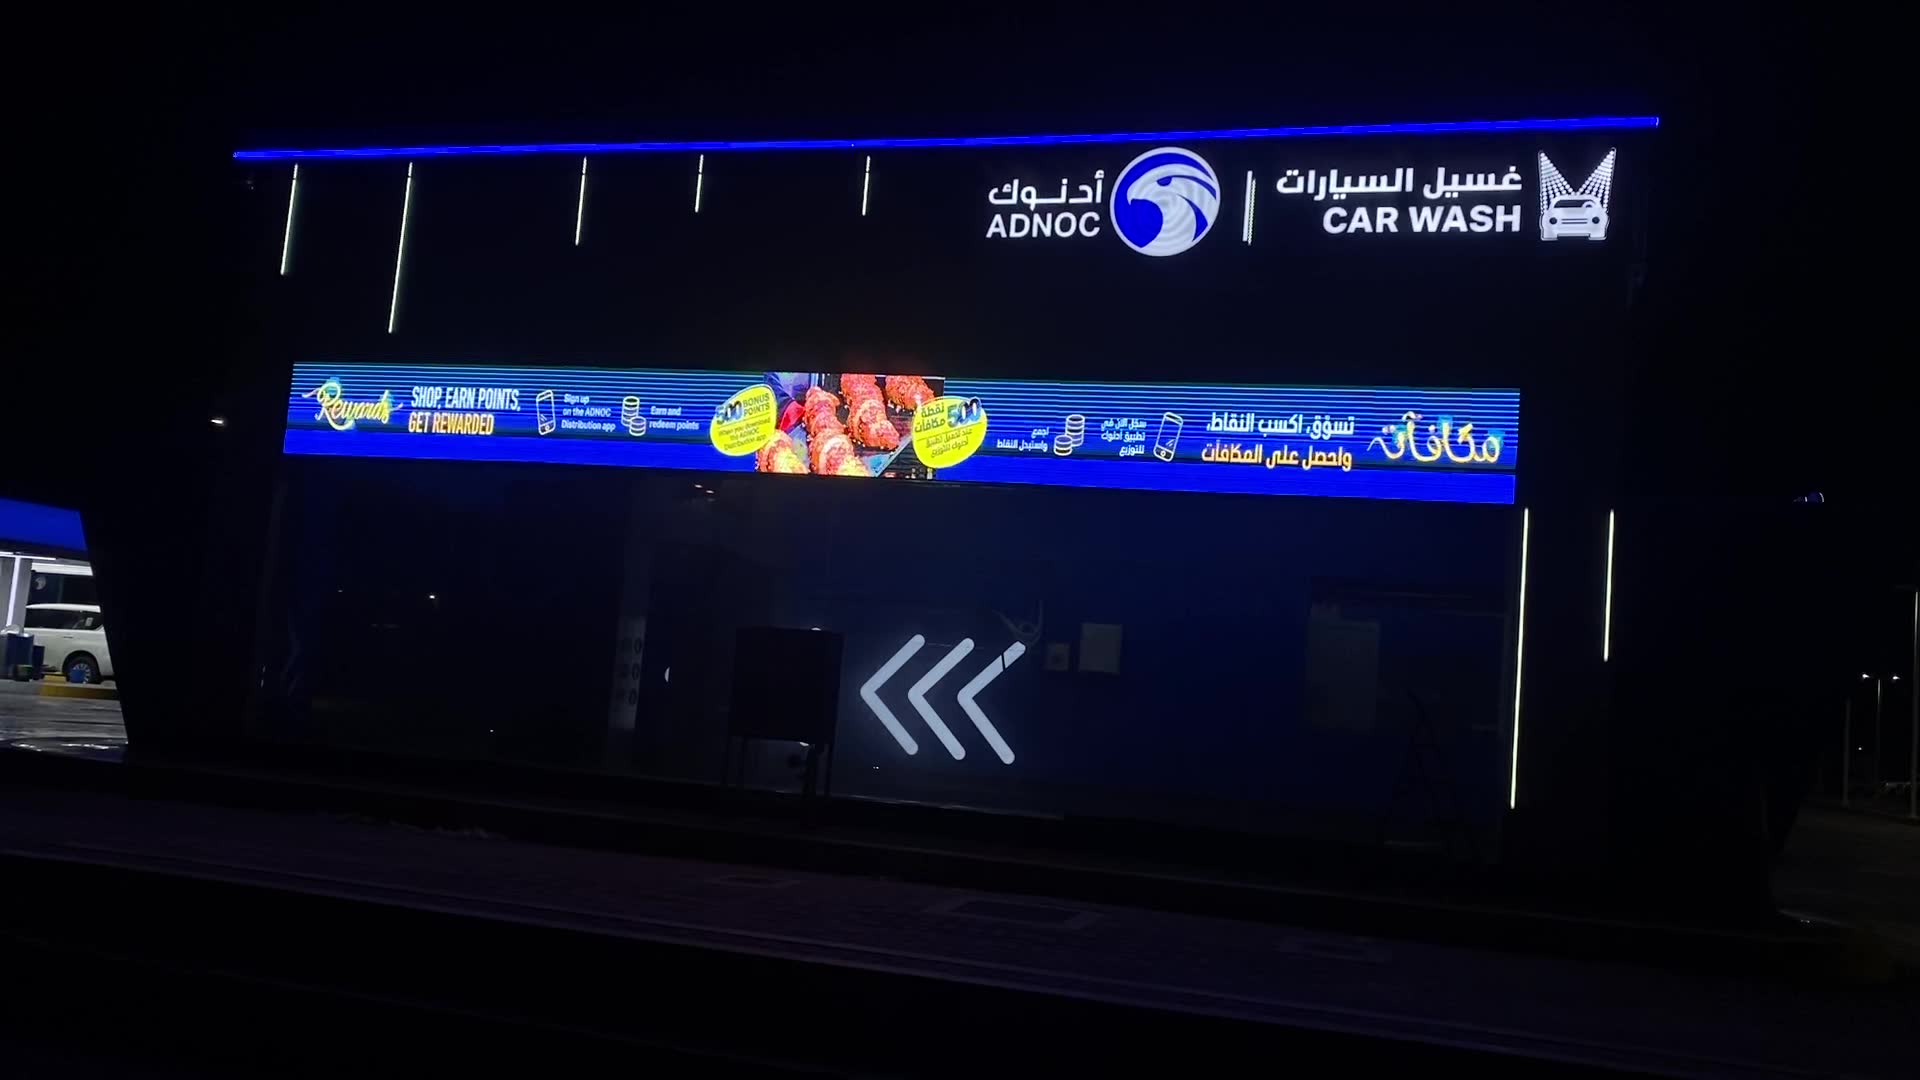 ADNOC-unique-outdoor-LED-screen-installed by best leading LED screen supplier in Dubai